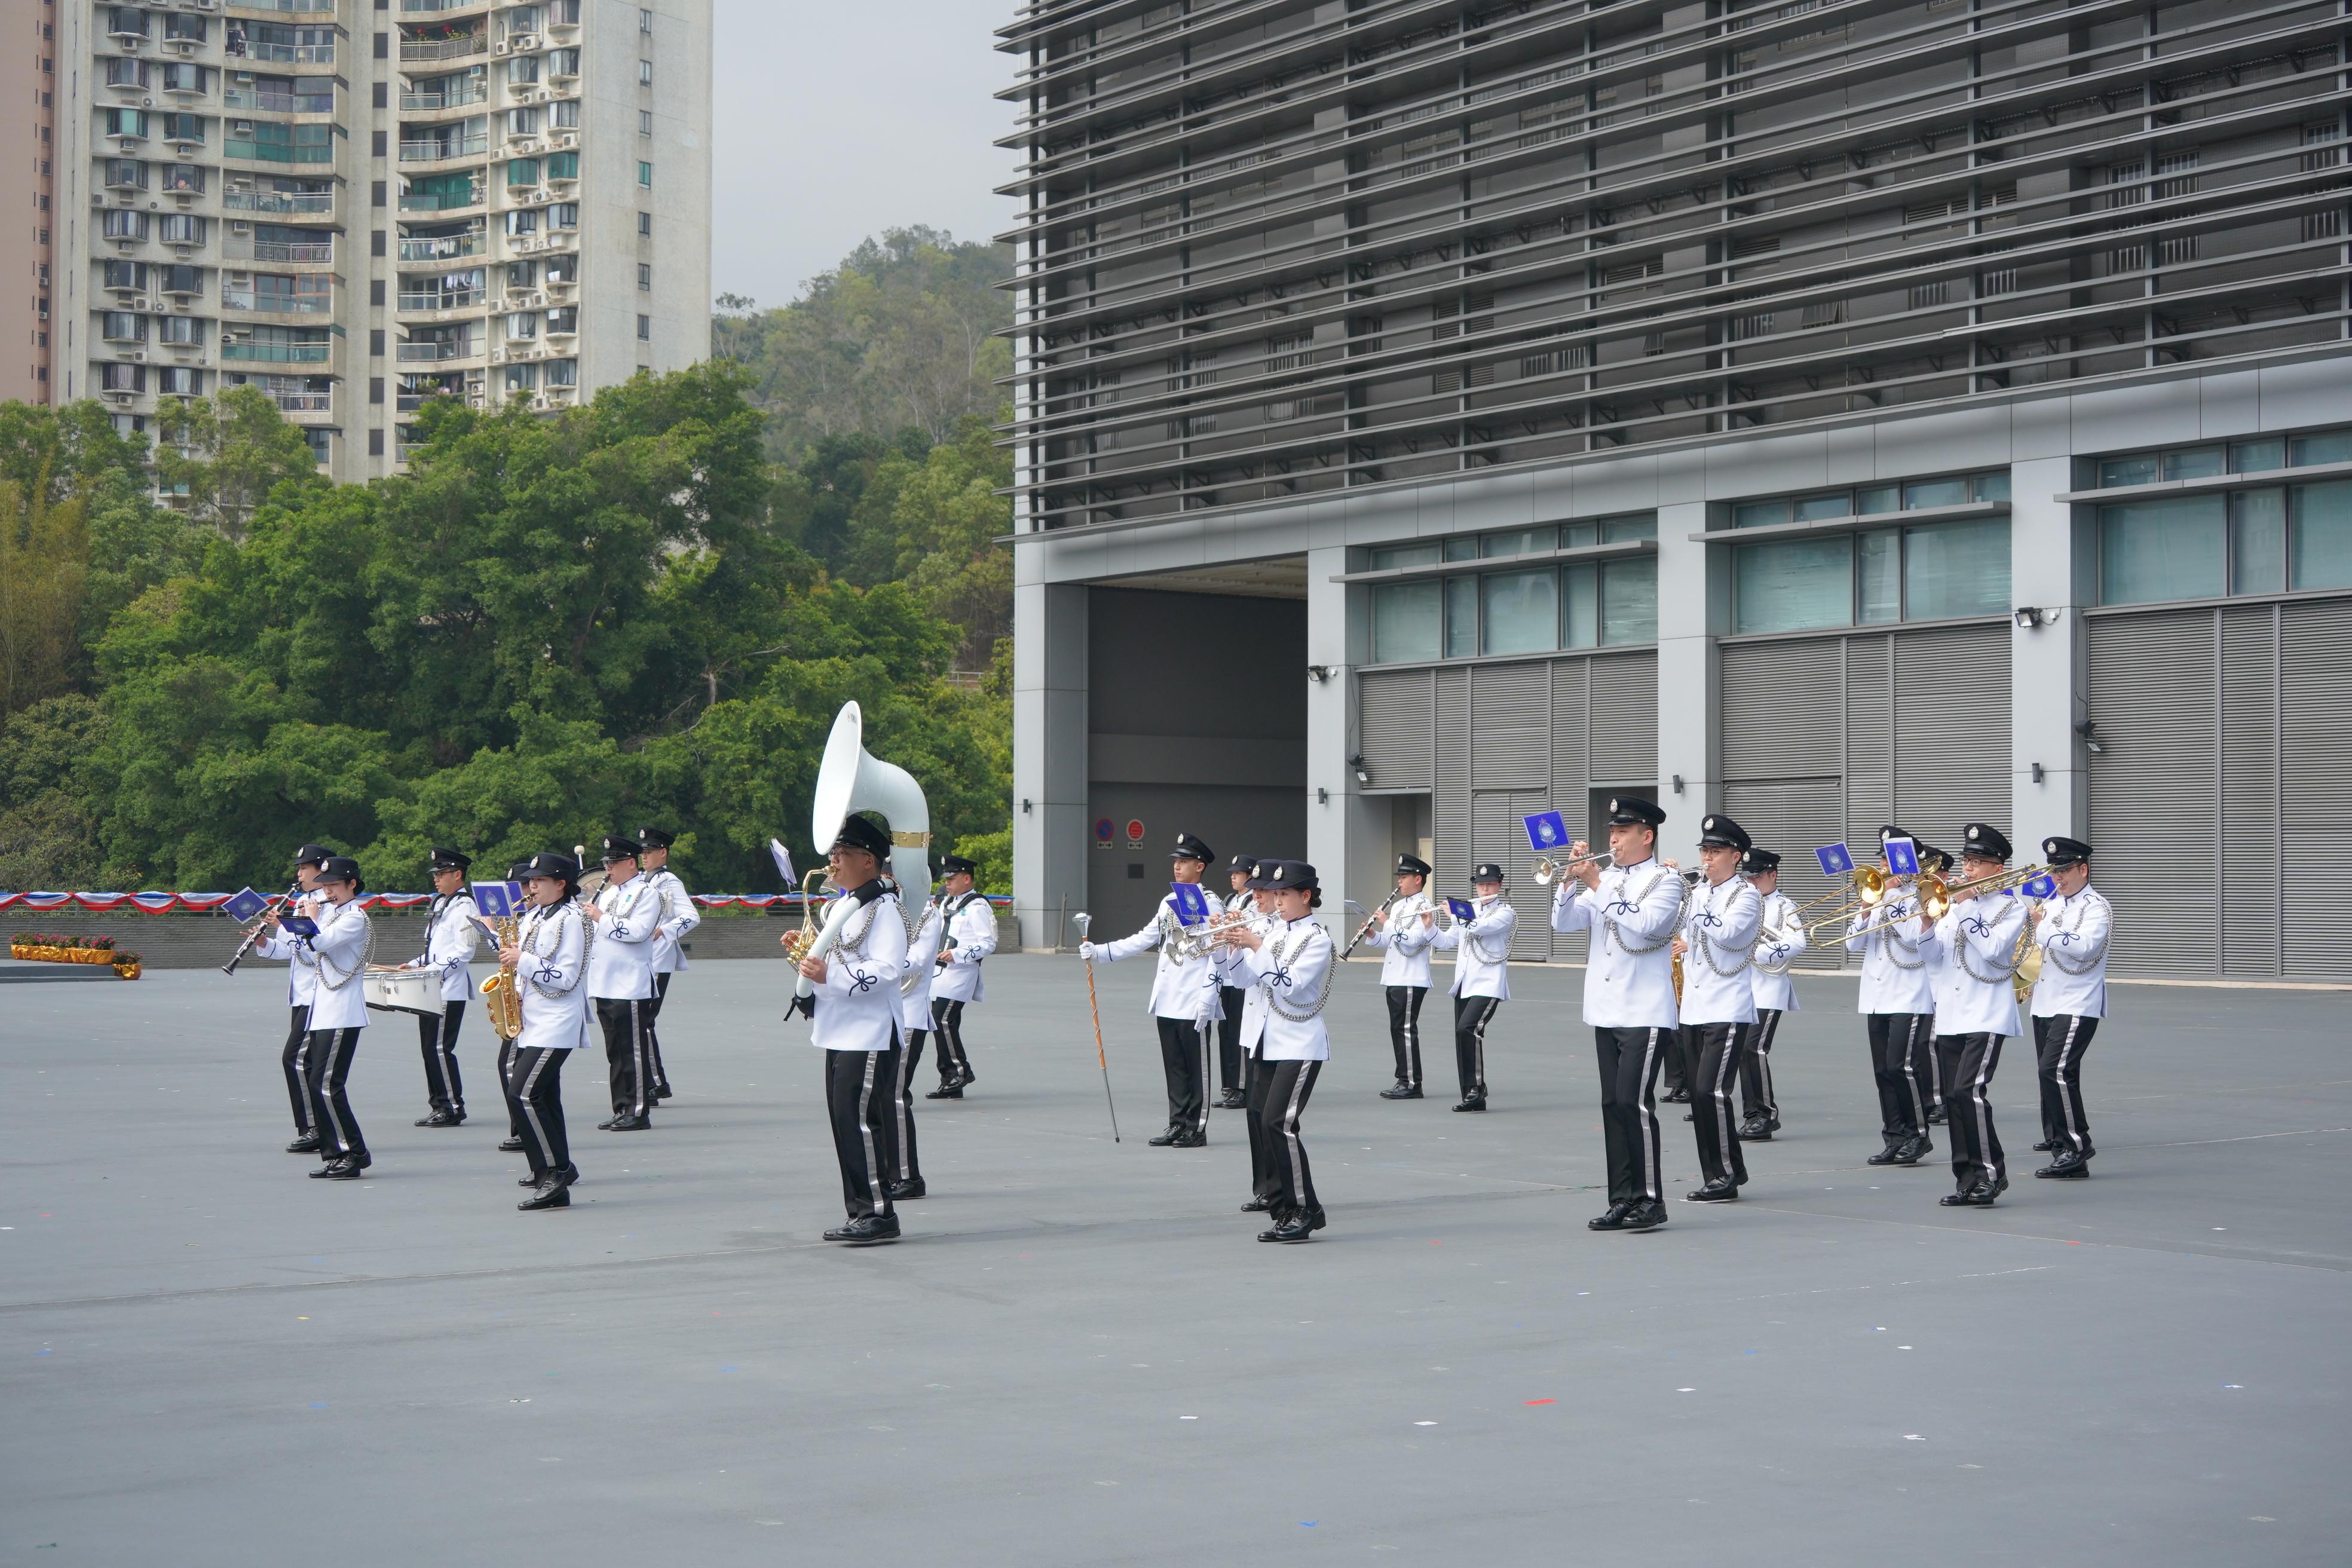 The Immigration Band performs at the Immigration Service Institute of Training and Development Passing-out Parade today (March 15).